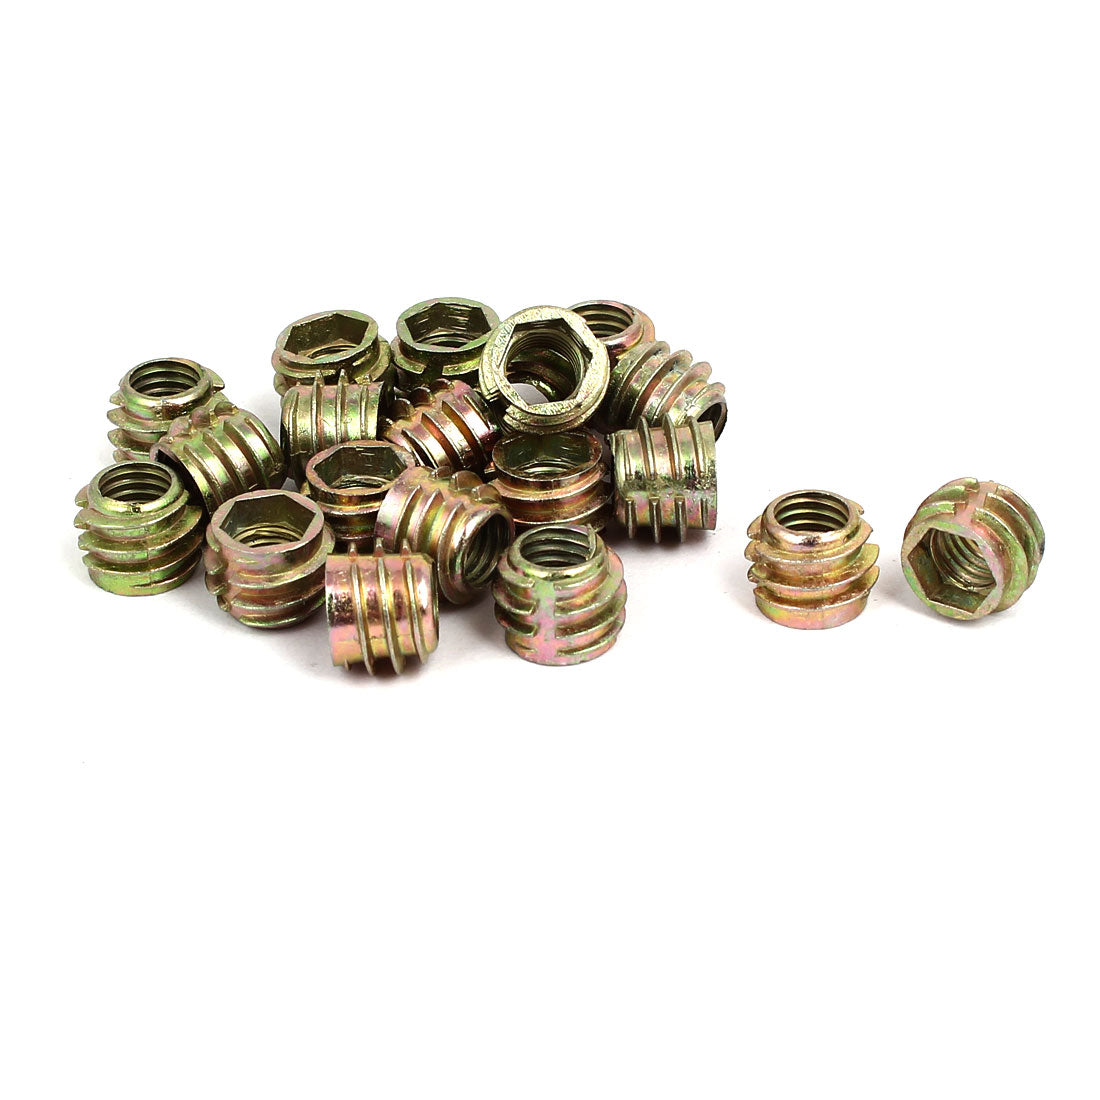 uxcell Uxcell M8x10mm Hex Socket Threaded Insert Nuts Bronze Tone 20pcs for Wood Furniture